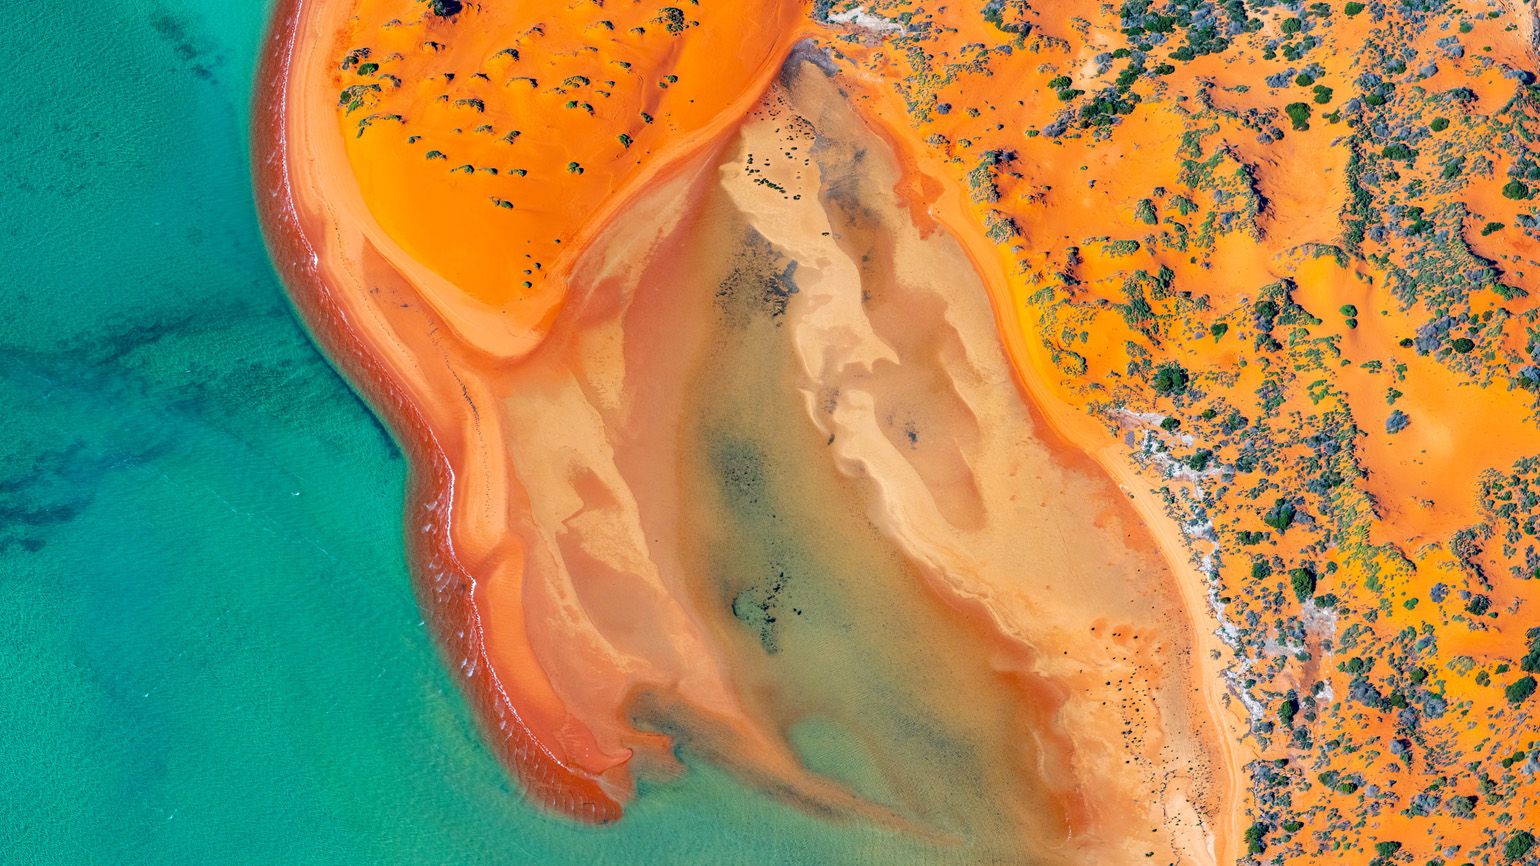 Abstract aerial photography in Australia; Getty Images